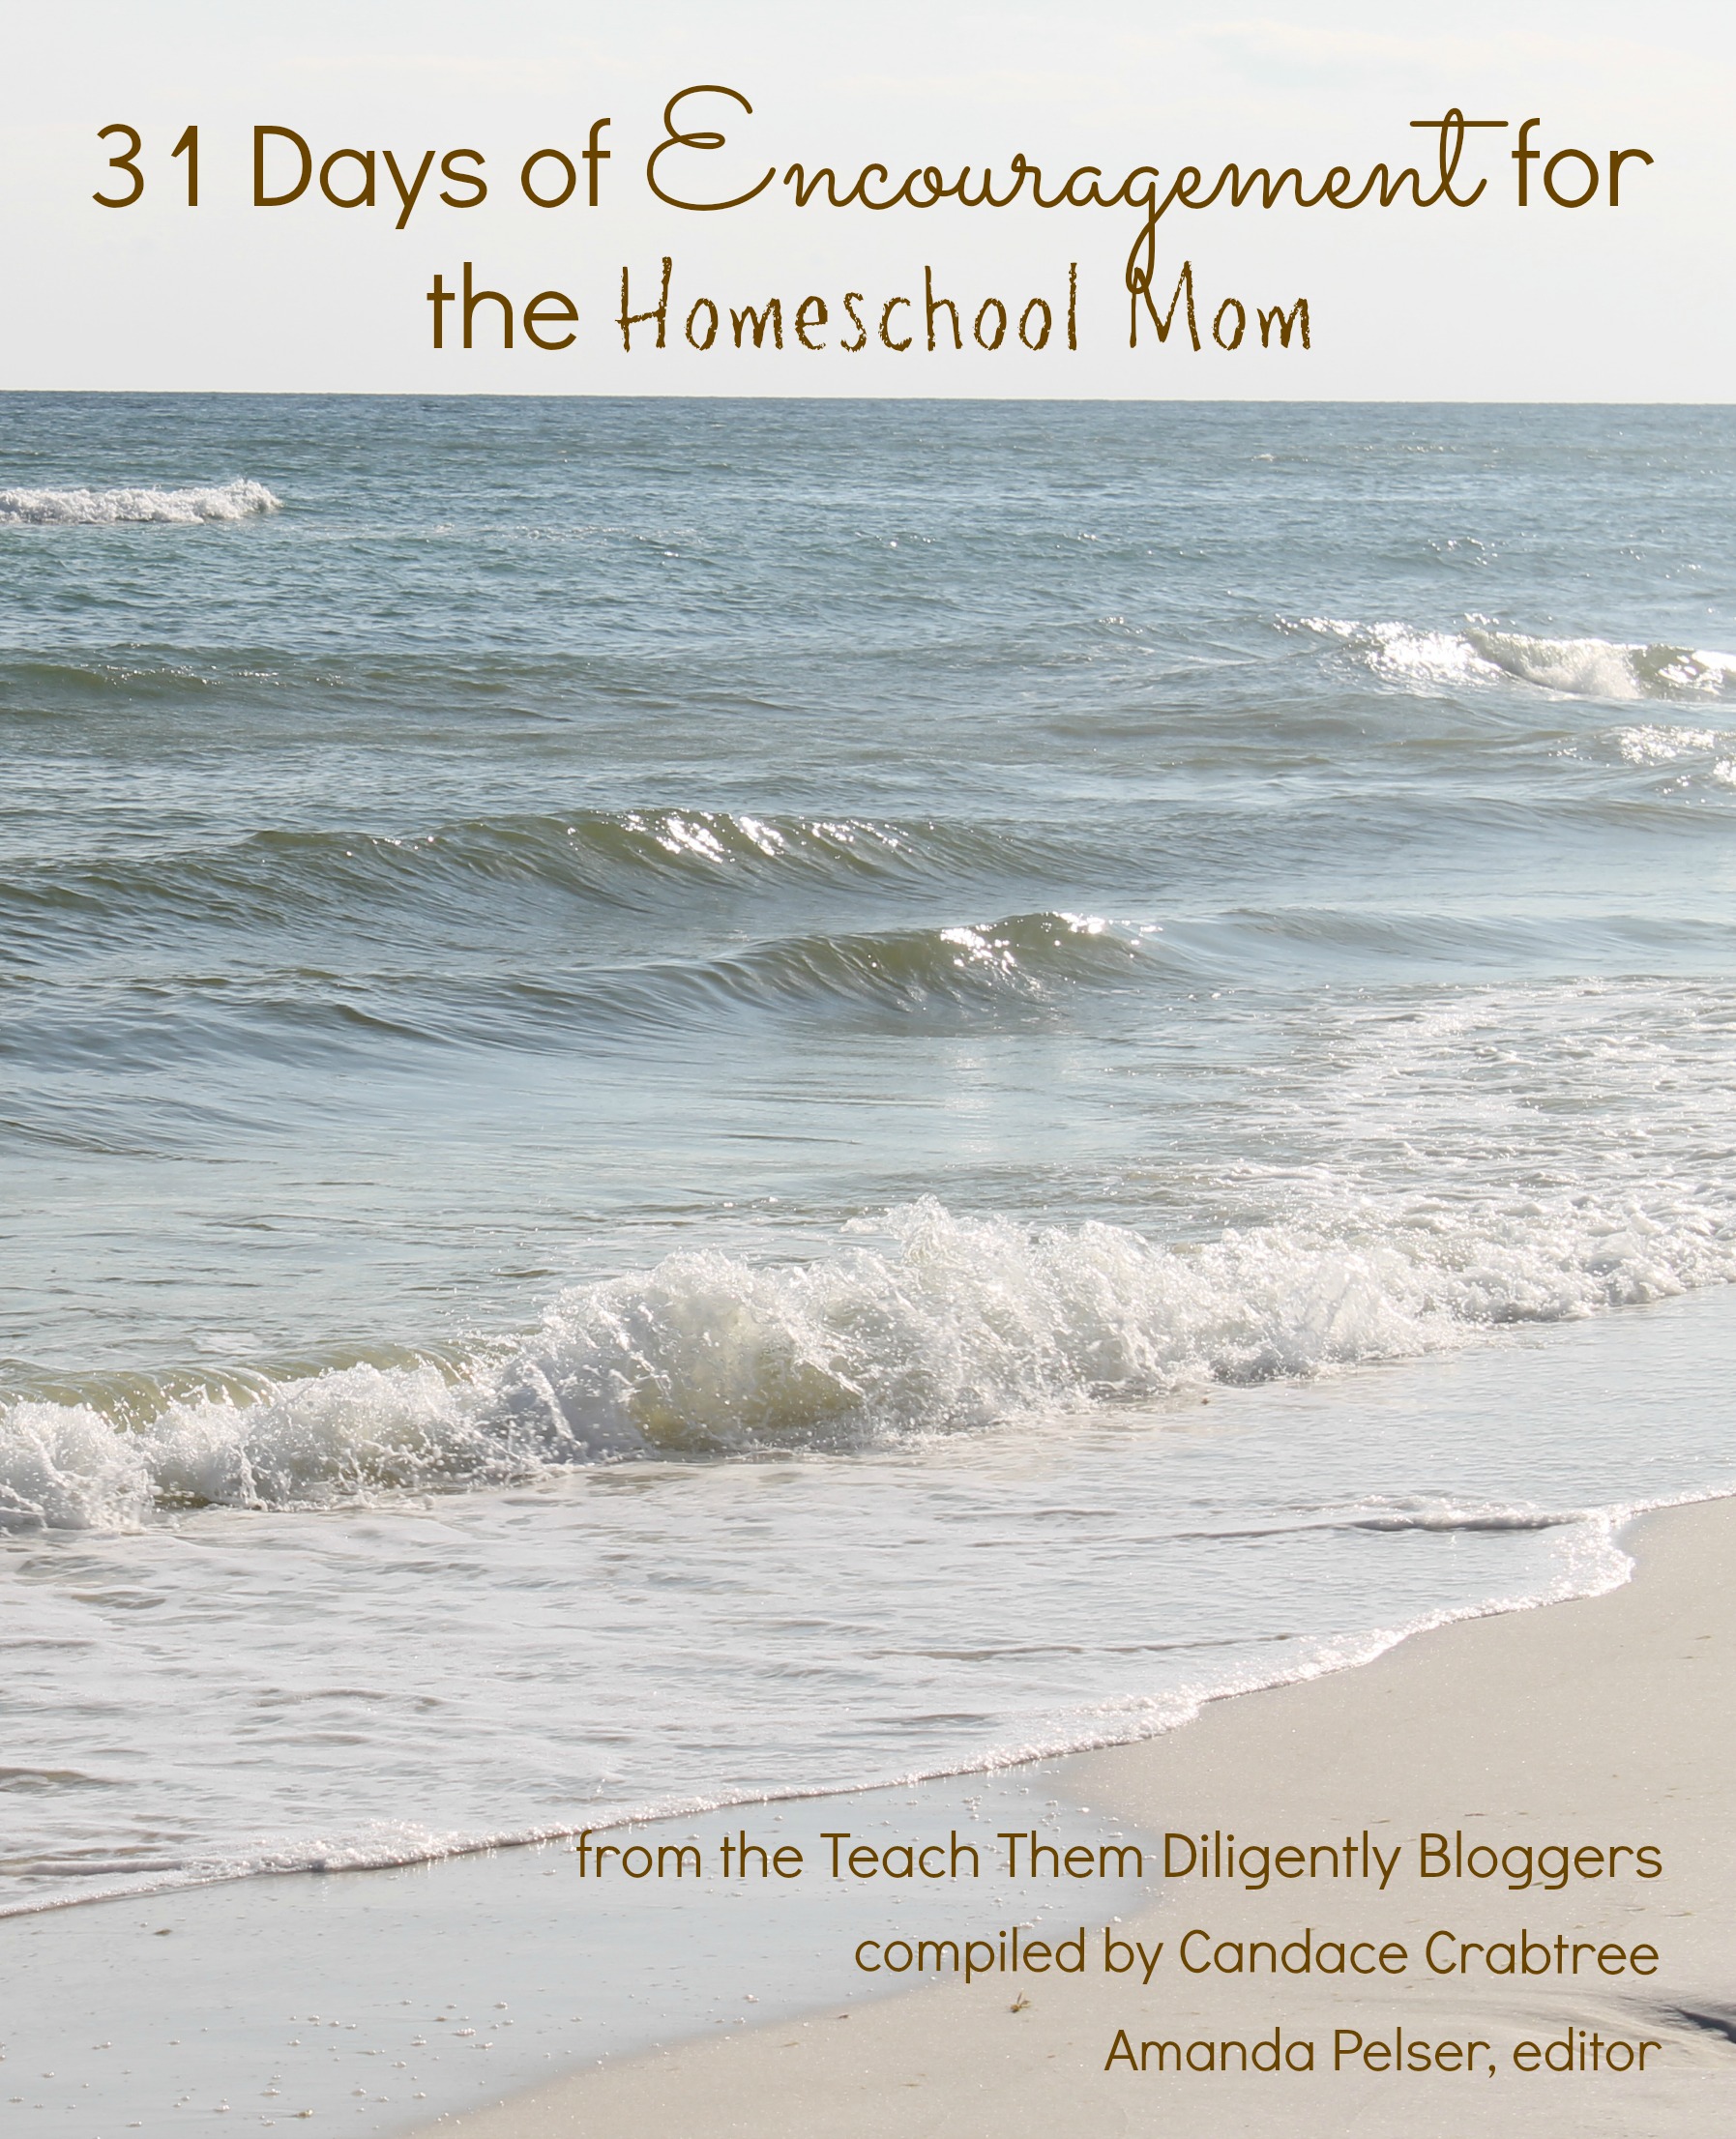 Receive 31 Days of Encouragement for Homeschool Moms FREE!